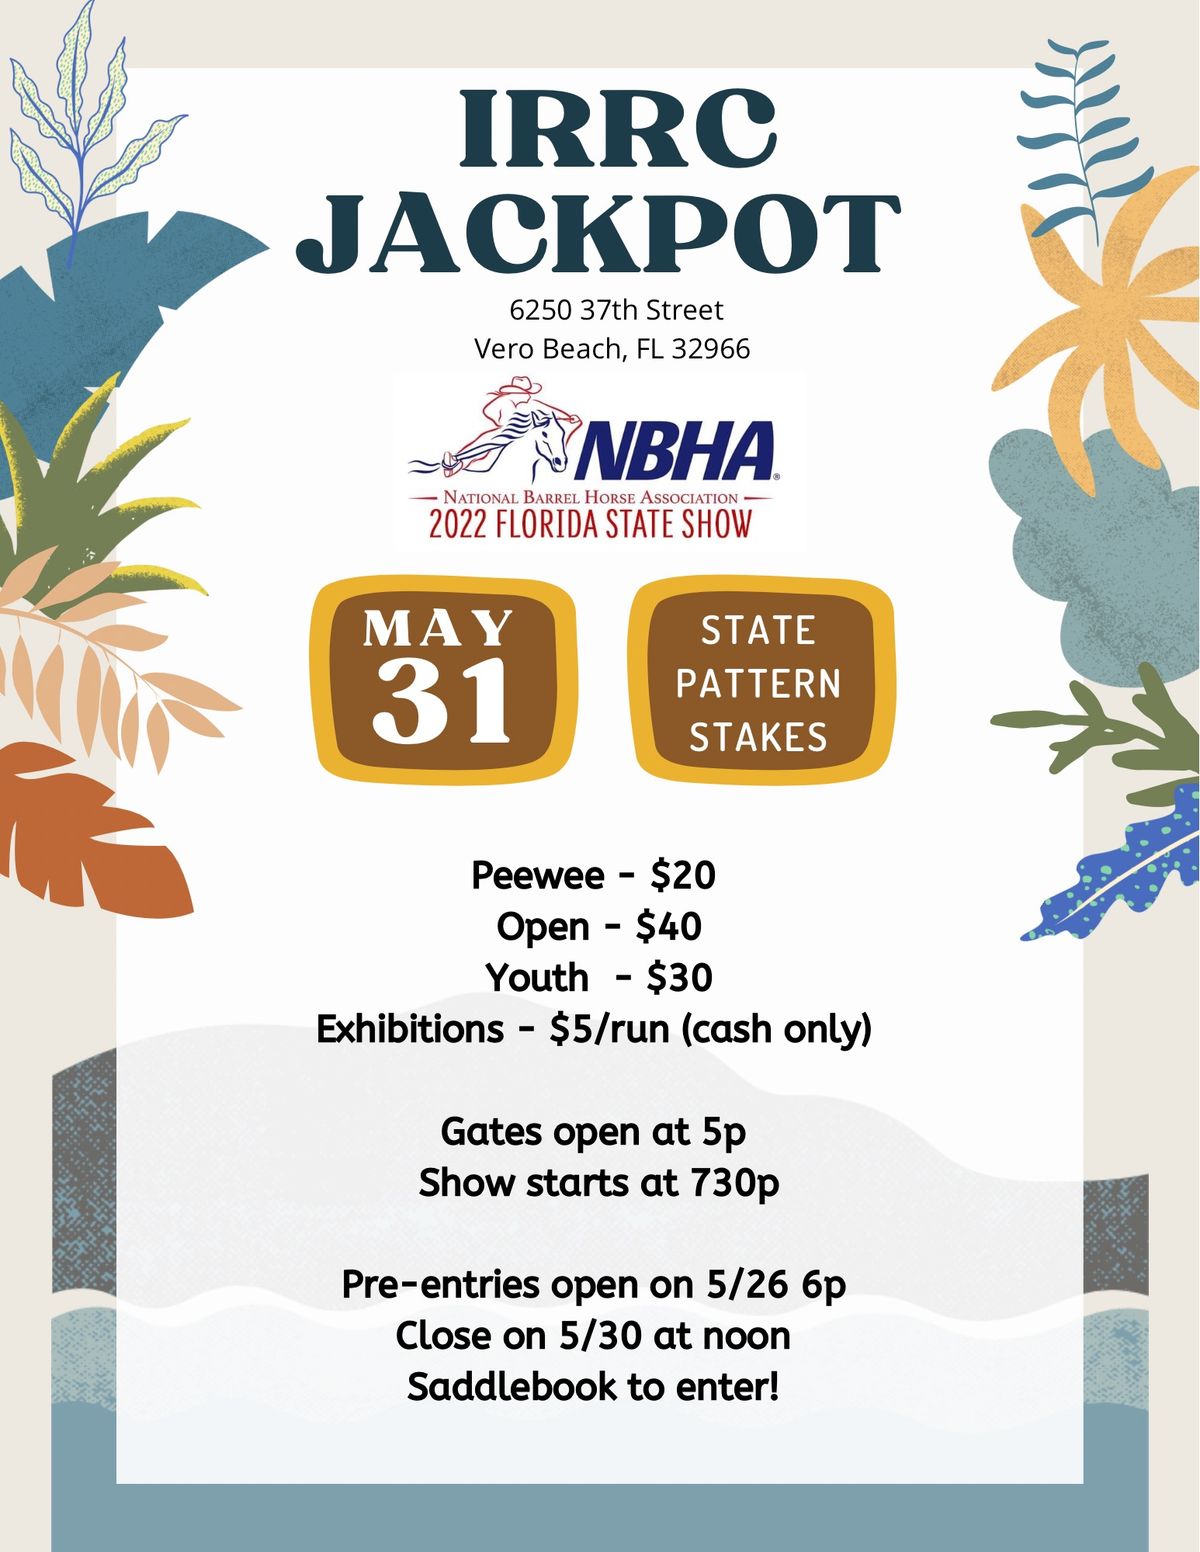 State Staked $250 Added Jackpot 